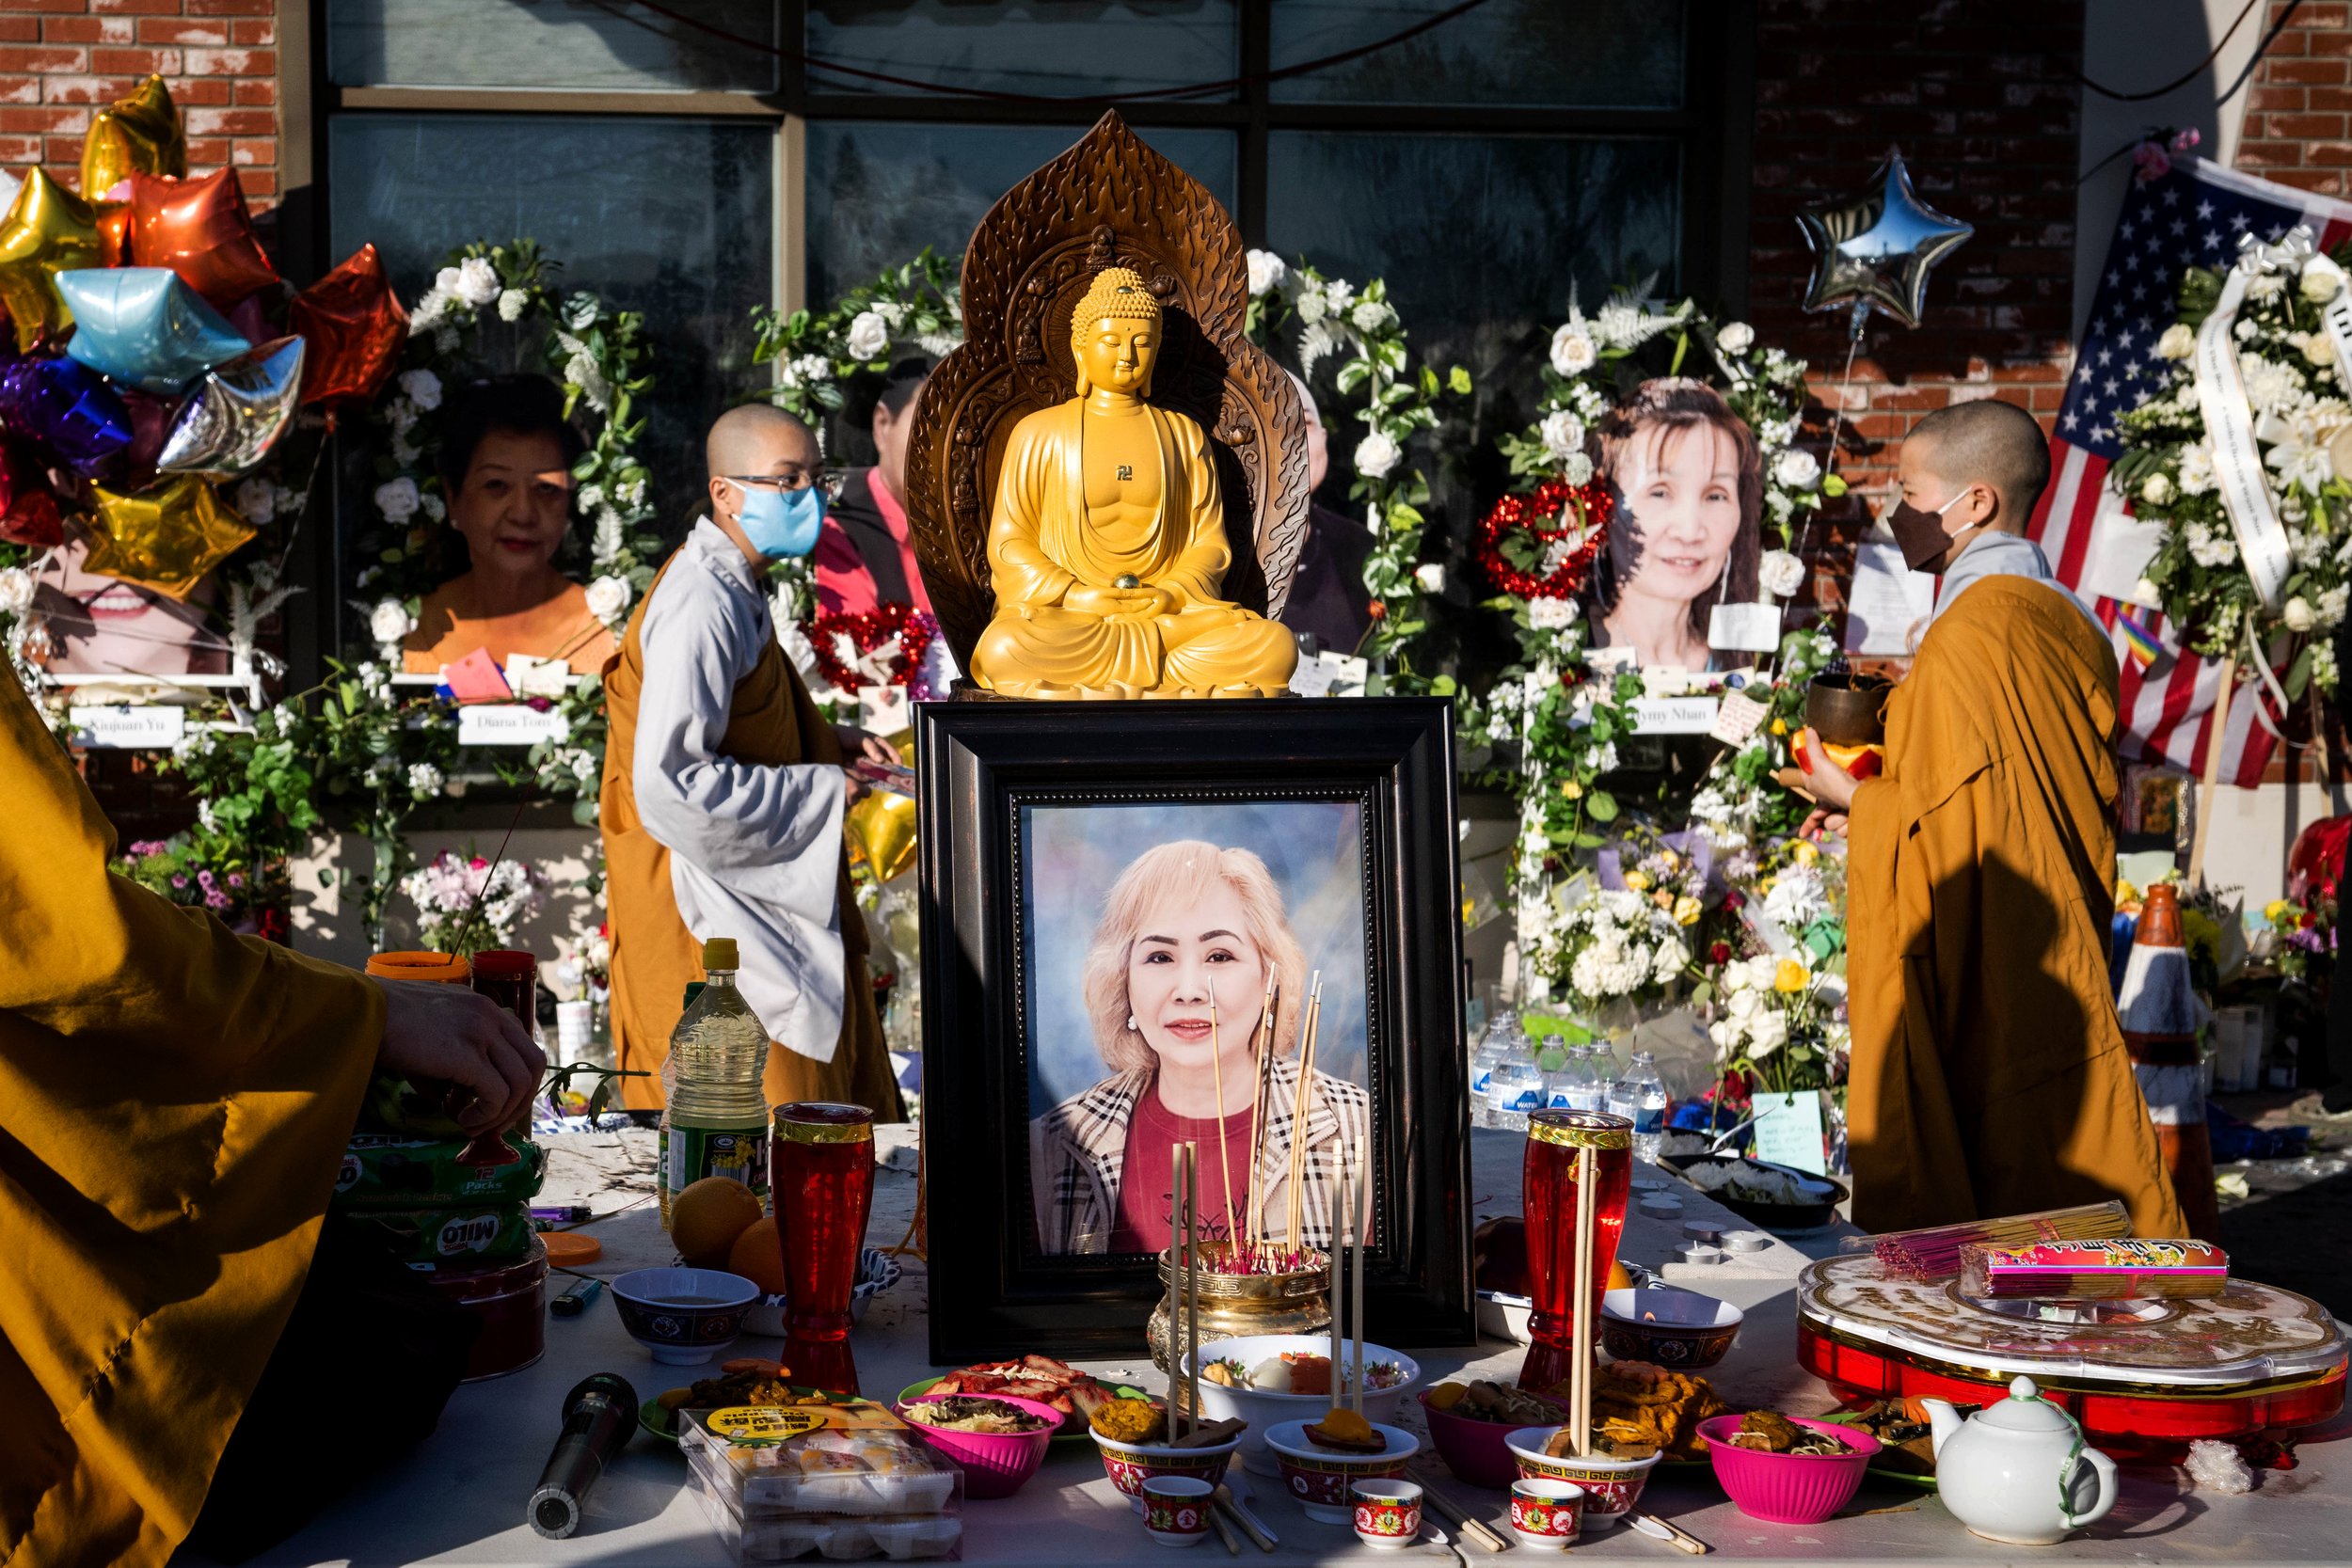  Dieu Phap Temple monks hold a service on Friday, January 27, 2023 for Muoi Ung, who was killed in the Monterey Park mass shooting at Star Ballroom Dance Studio.  